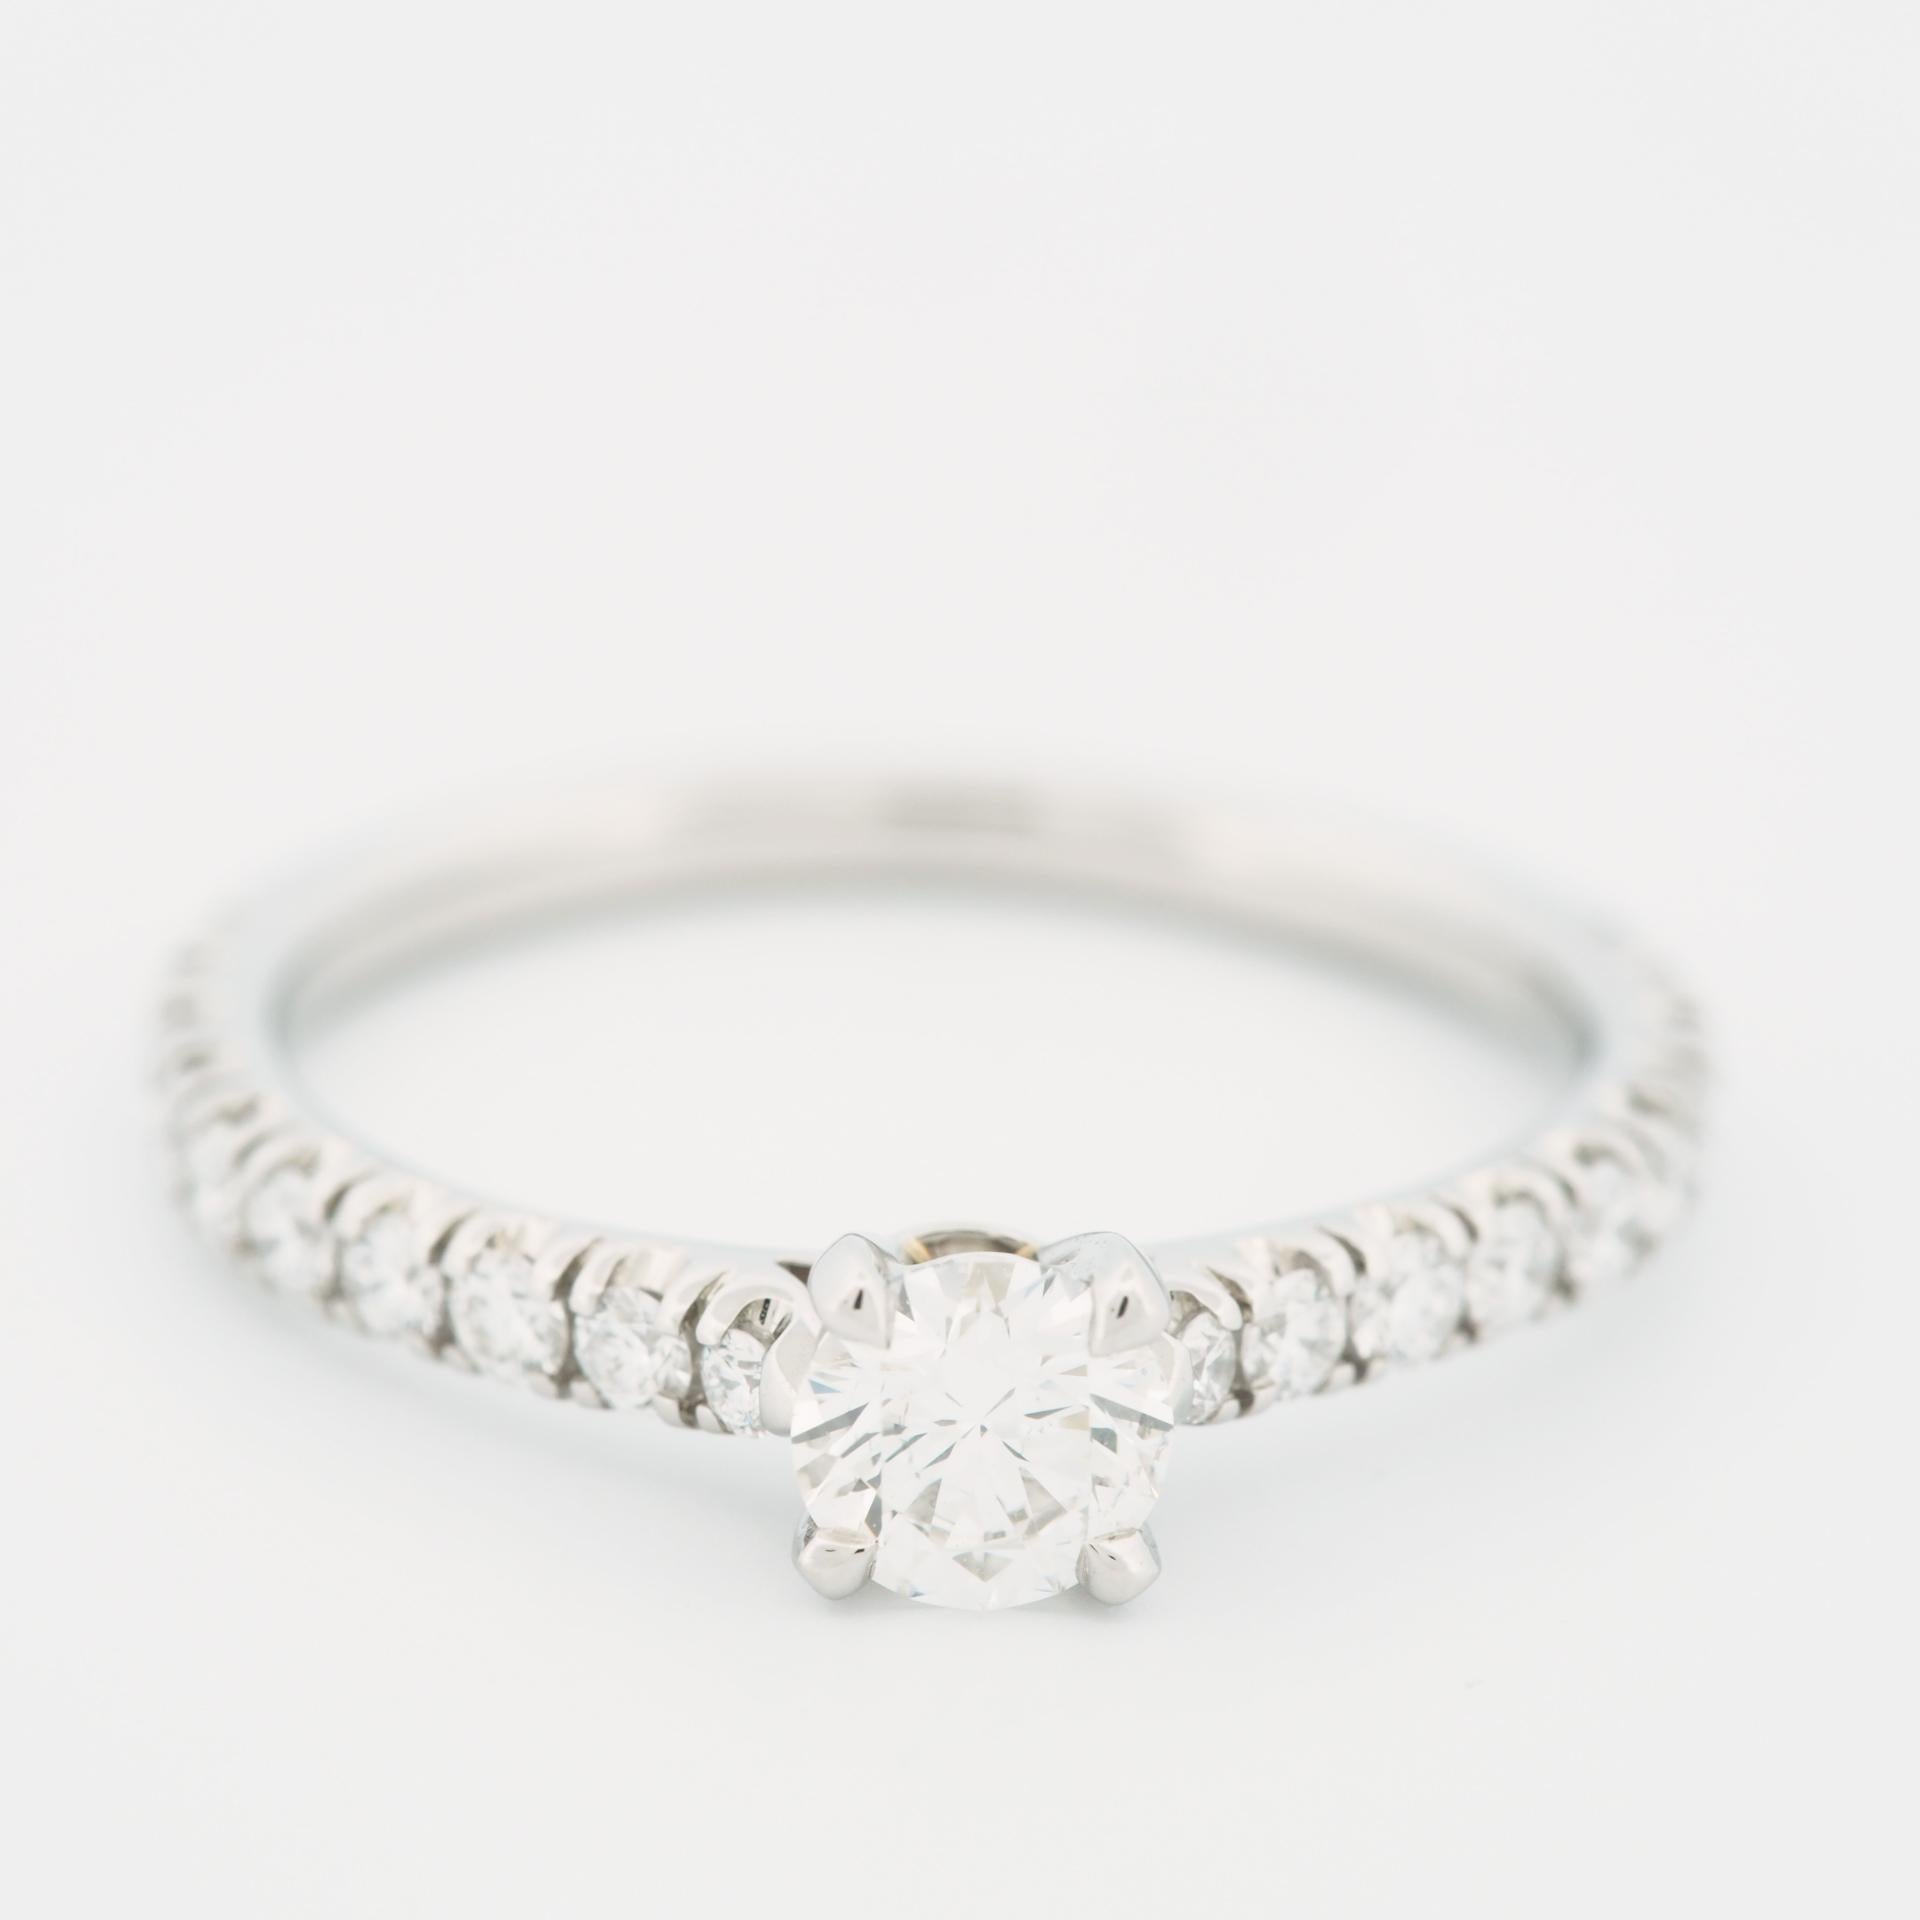 Cartier Etincelle Solitaire 0.31 Carat Diamond Ring Pt 49 In Good Condition For Sale In Kobe, Hyogo